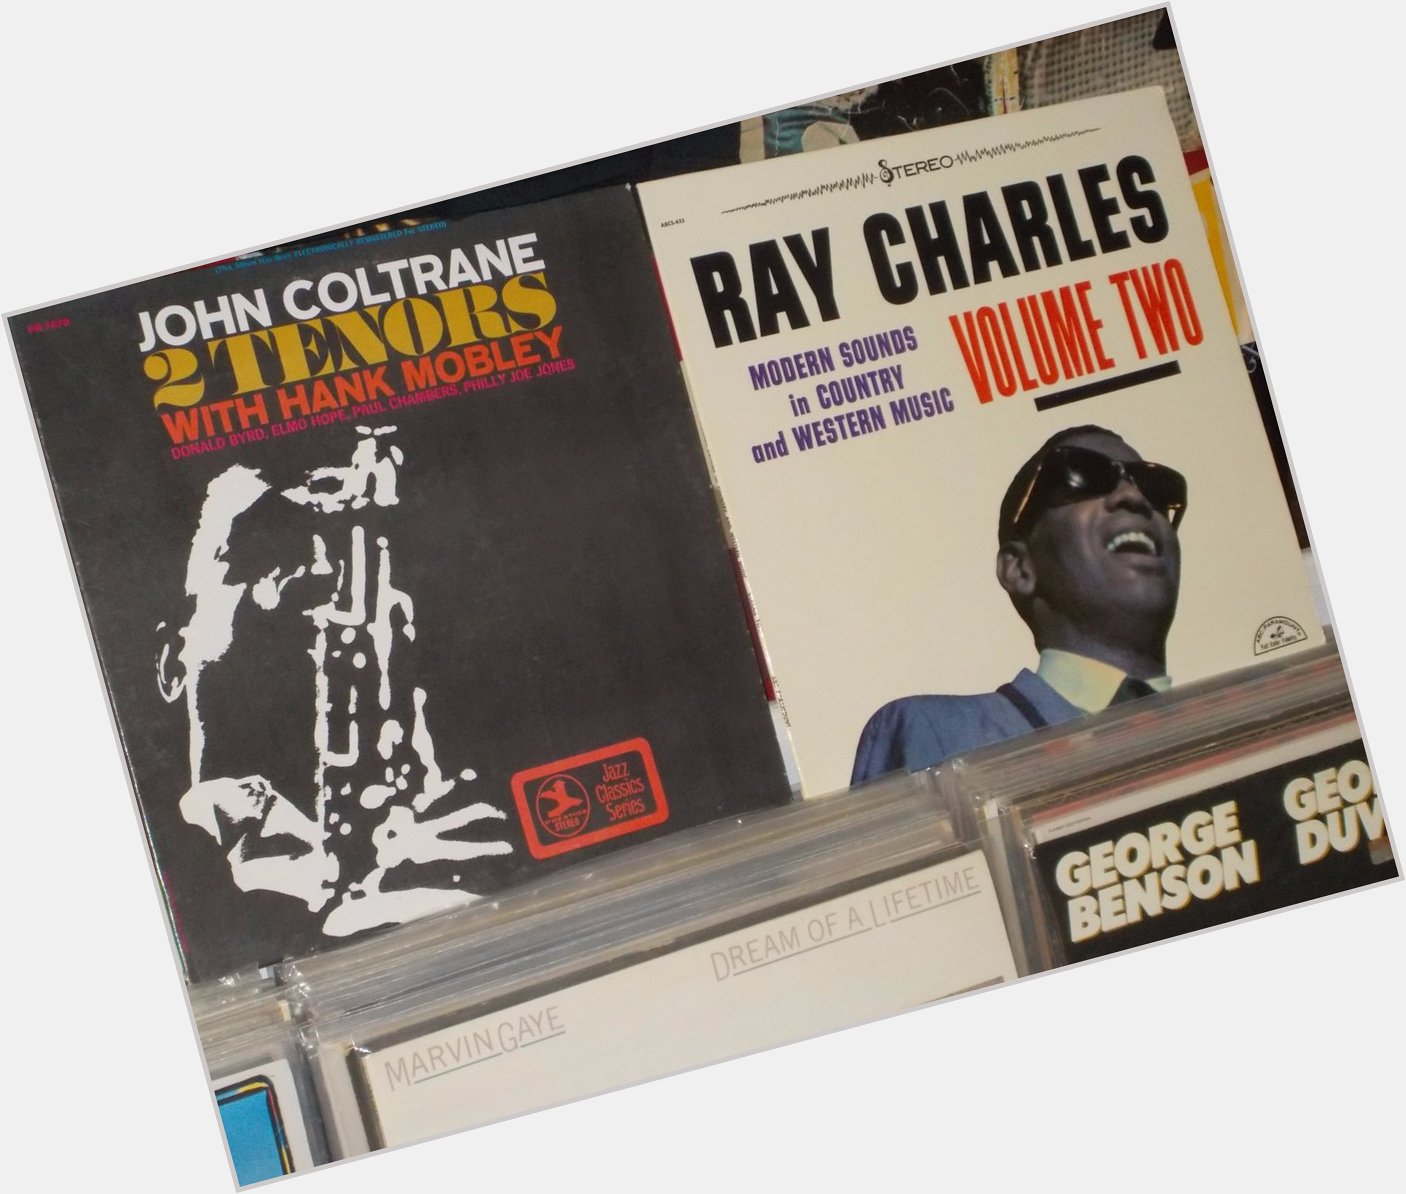 Happy Birthday to the late John Coltrane & the late Ray Charles 